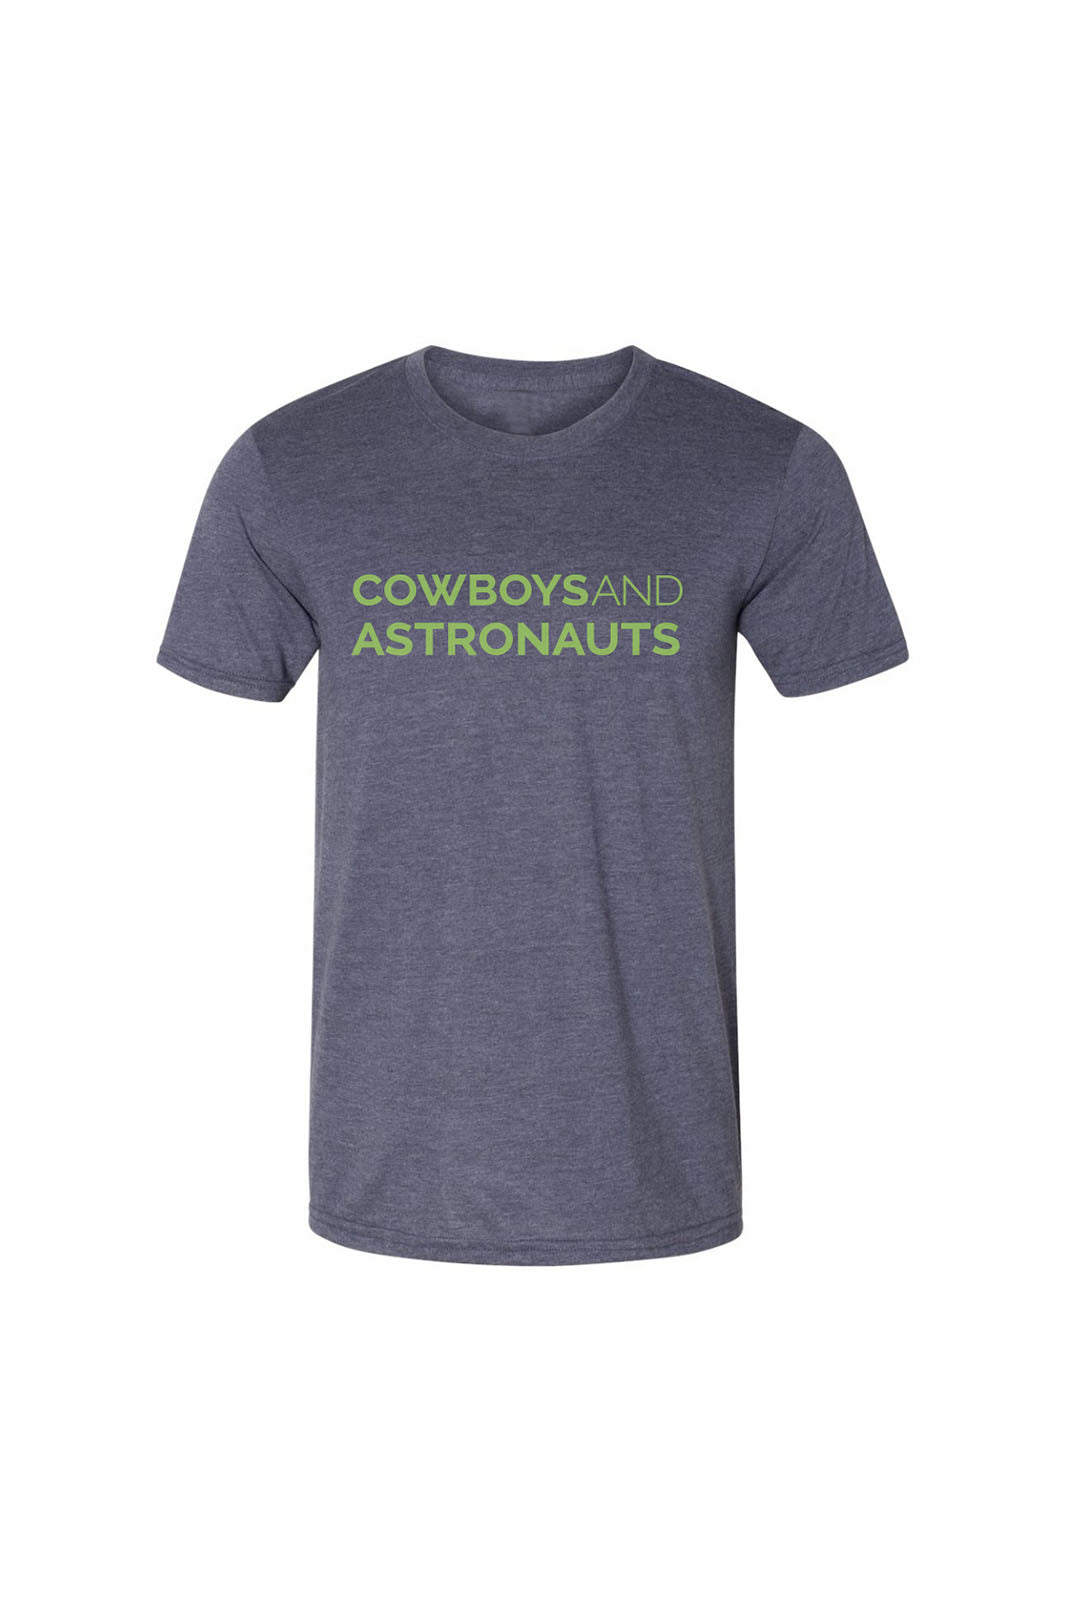 Cowboys and Astronauts T-Shirt - Navy/Lime